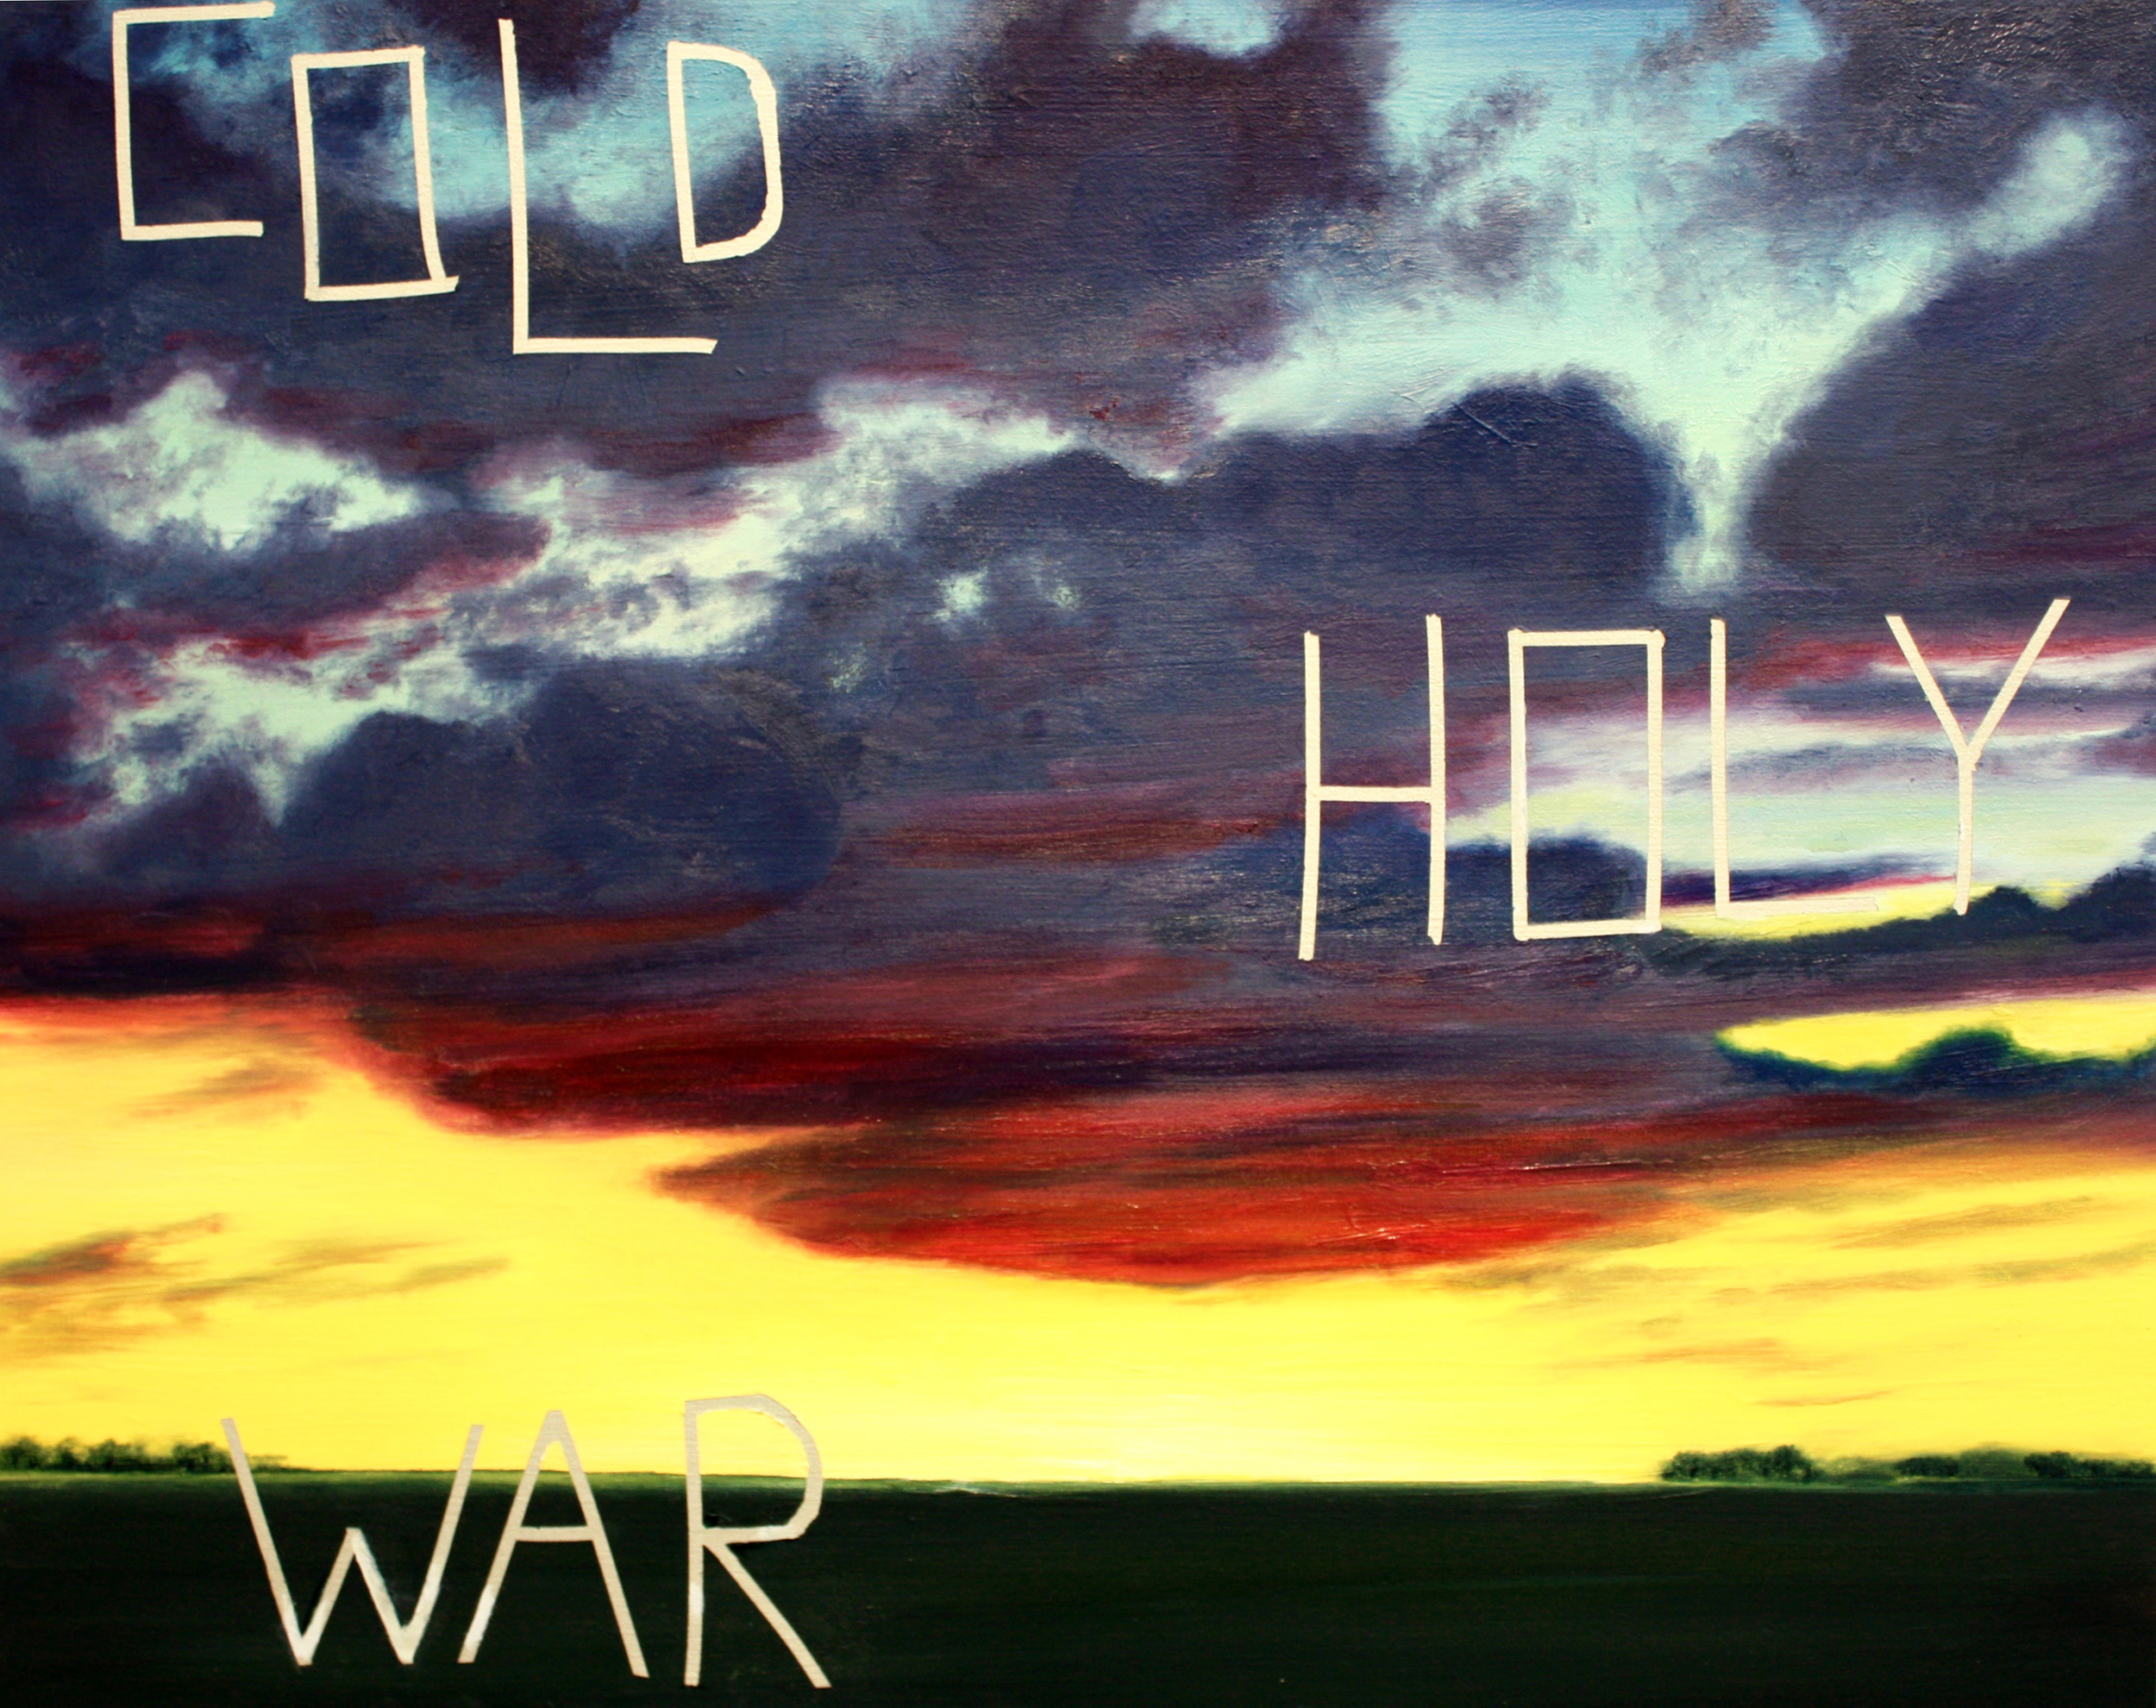 untitled (cold holy war)